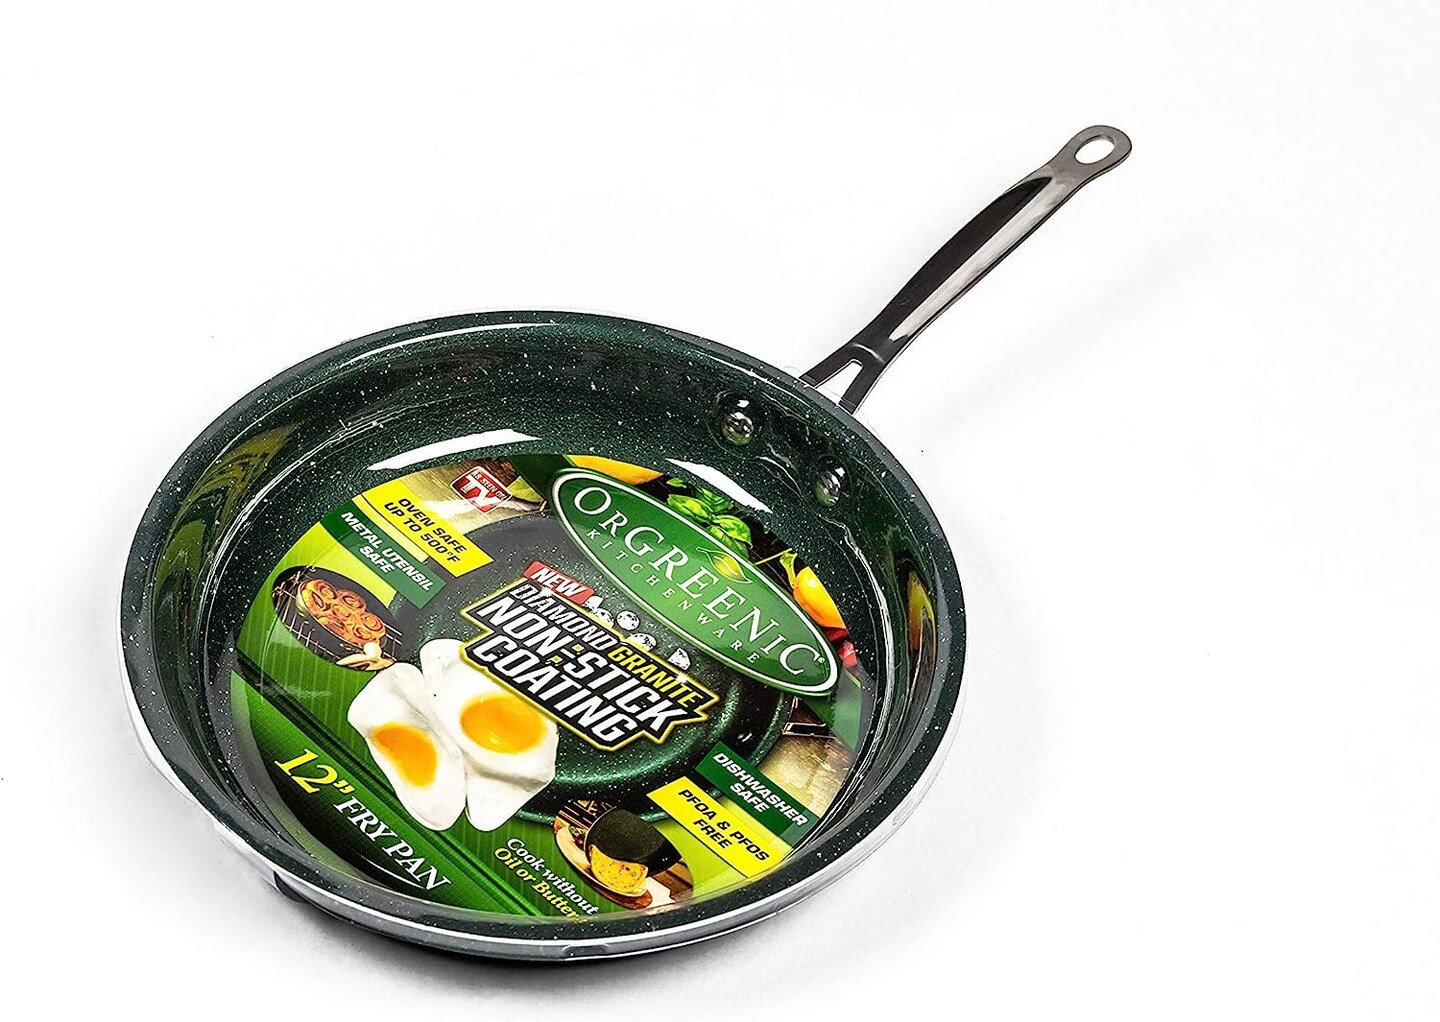 Orgreenic 12in Ceramic Non Stick Frying Pan - Green for sale online